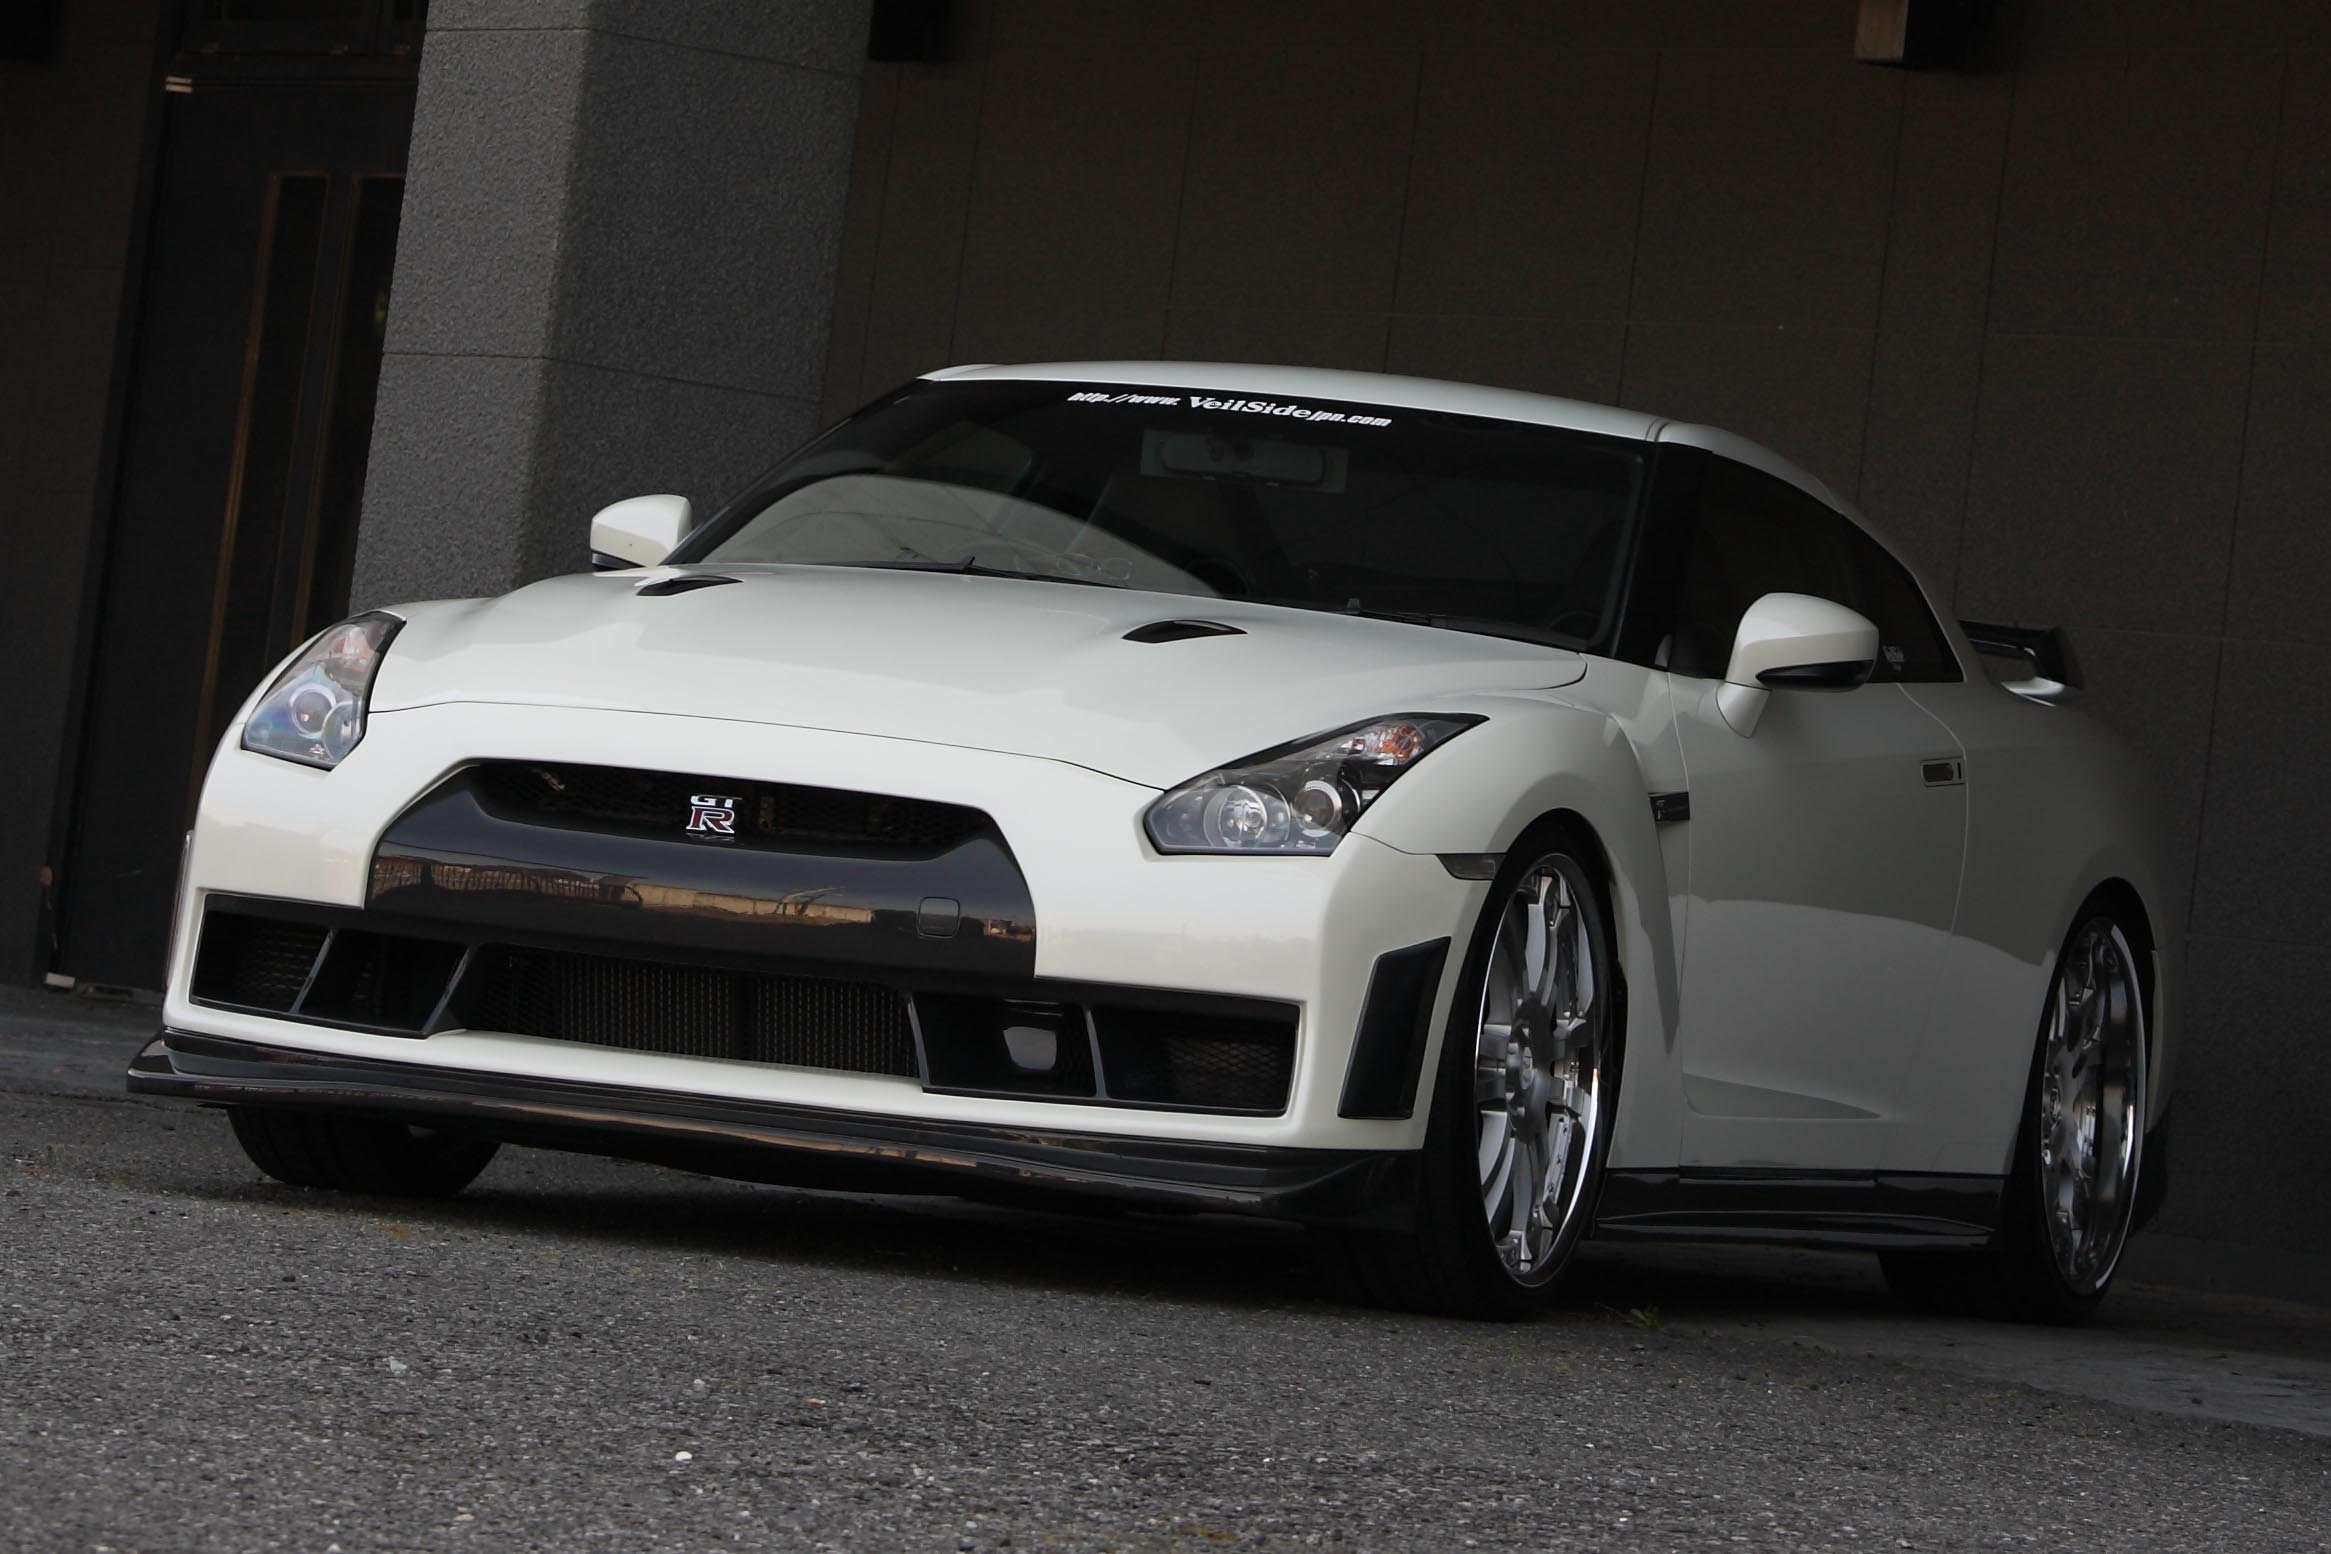 Check our price and buy VeilSide body kit for Nissan GT-R!